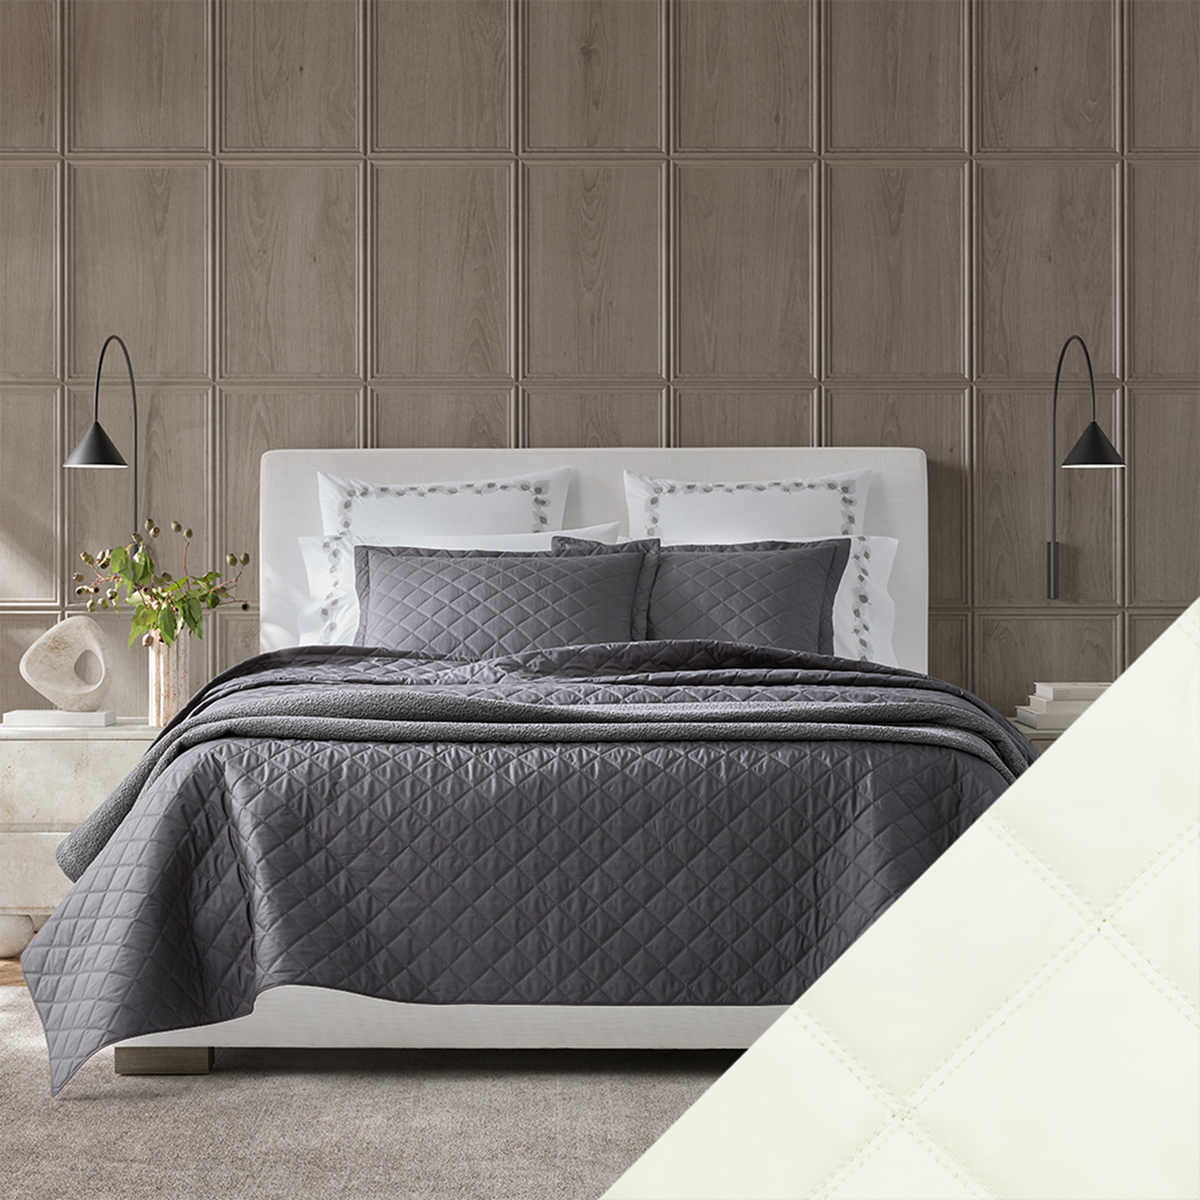 Bed Dressed in Matouk Milano Quilt Bedding with Swatch in Color Ivory